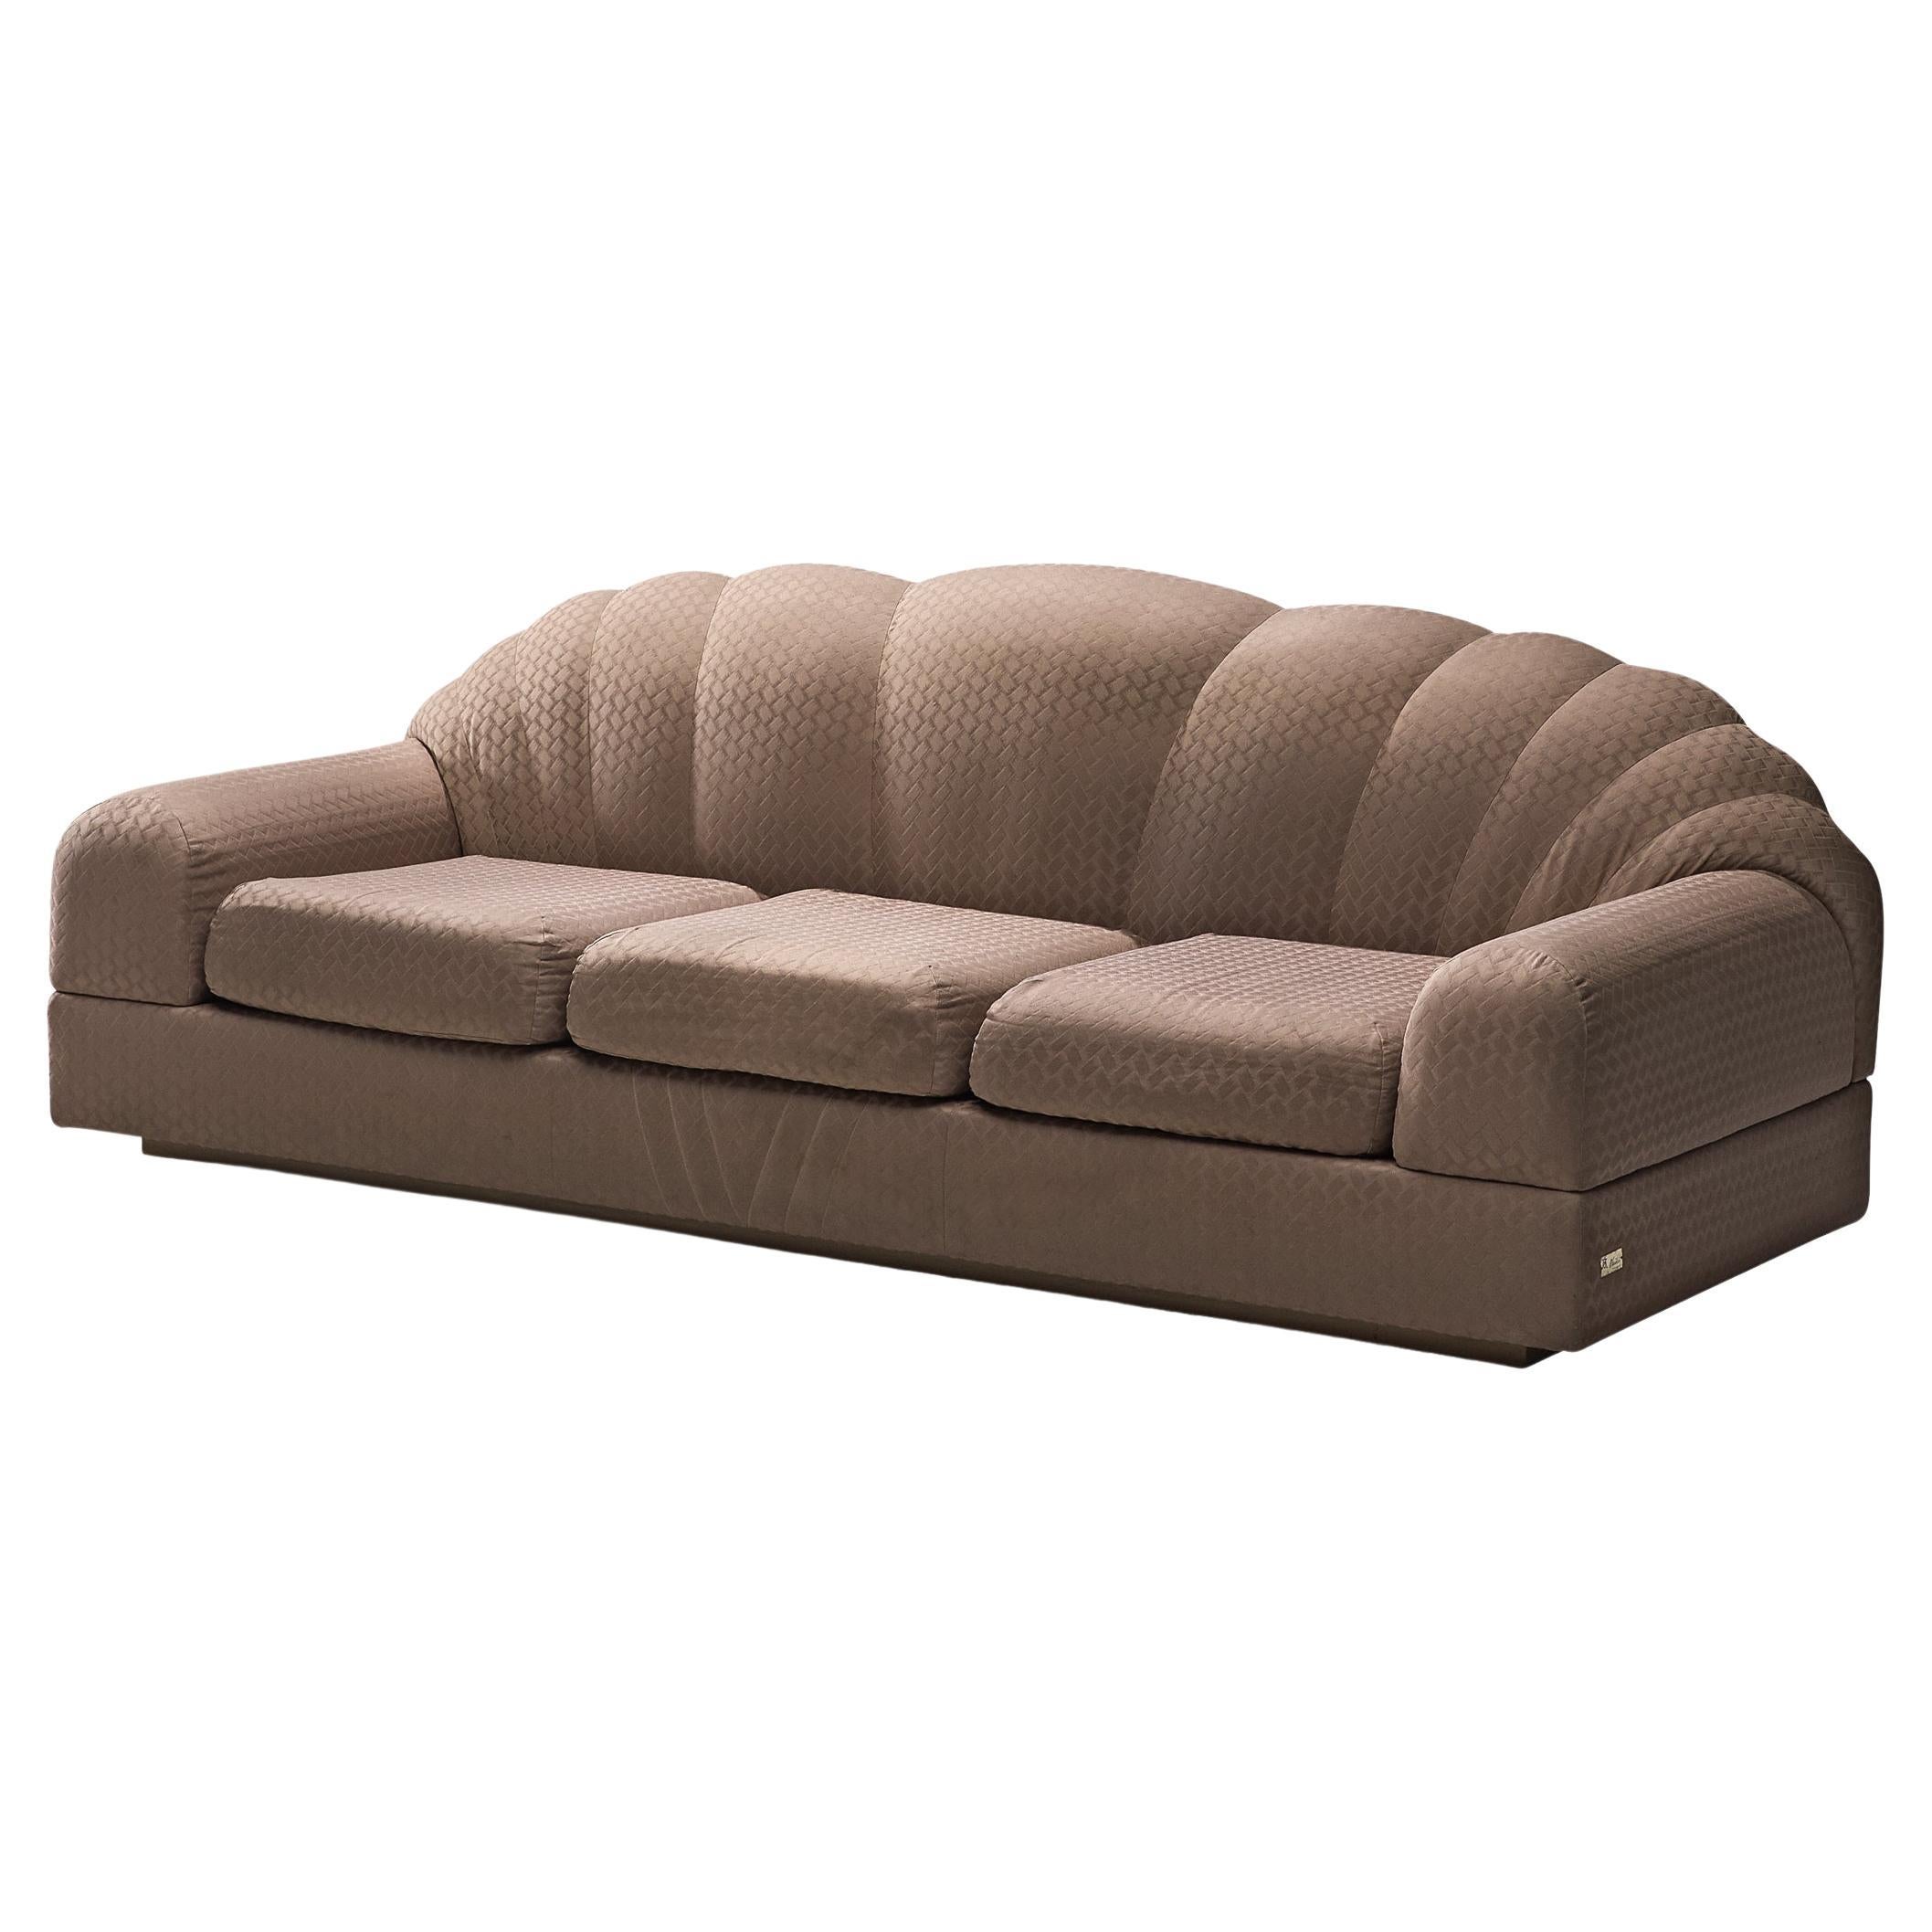 Alain Delon "Salon" Three Seat Sofa in Taupe Upholstery For Sale